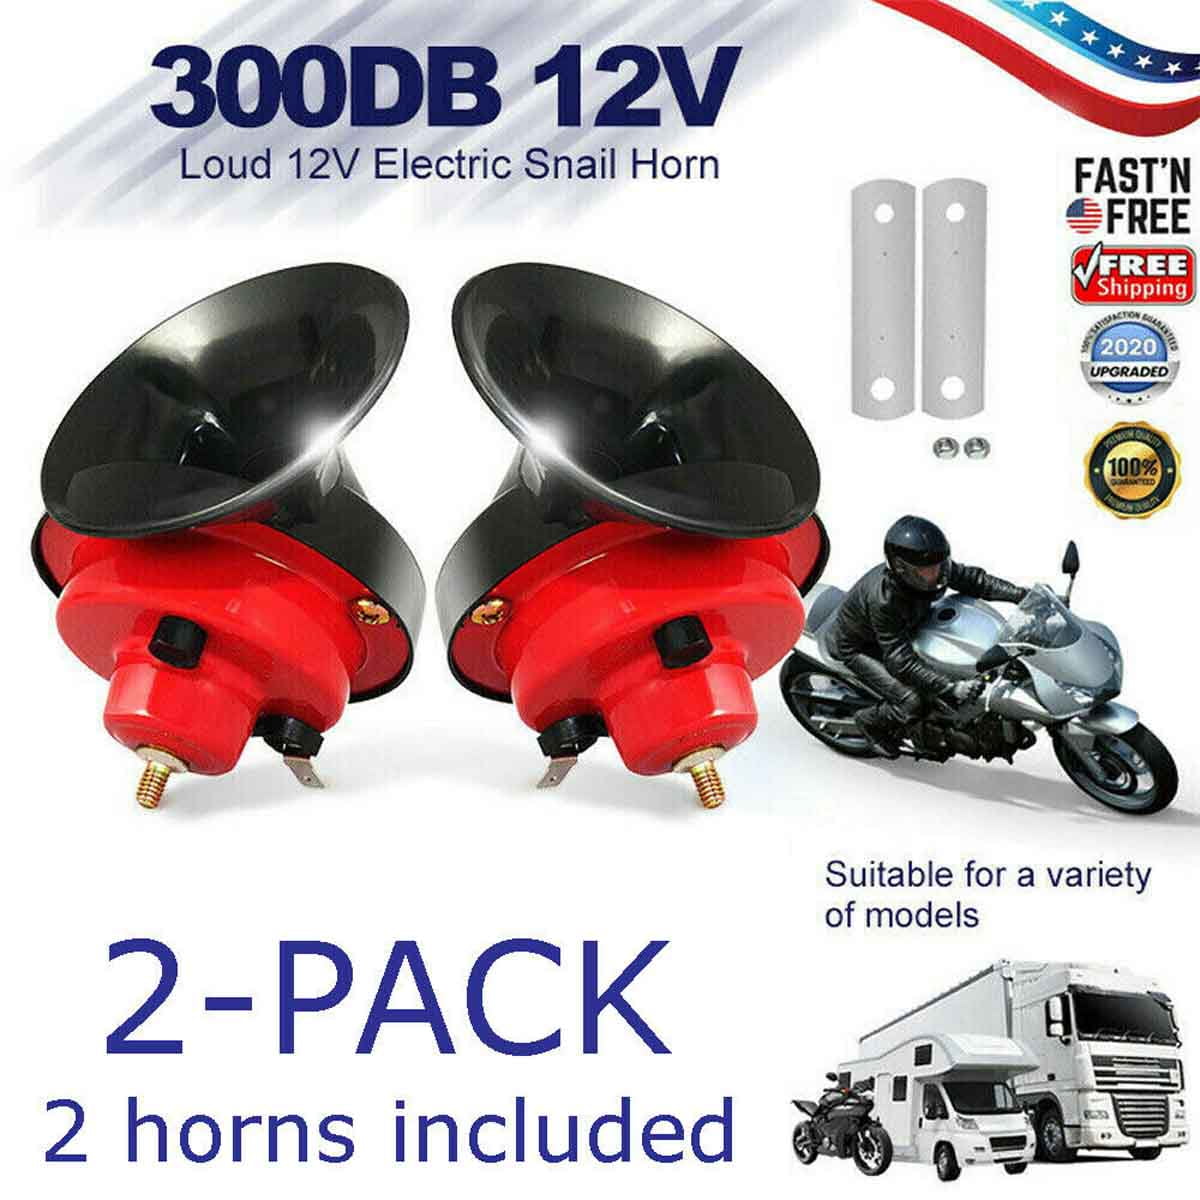 300 DB super train horn for truck A pair of speakers air car truck and 300db Train Horn Trucks,Loud Air Electric Snail Single Horn,Waterproof Motorcycle Horn,12v Double Raging Sound Carr 